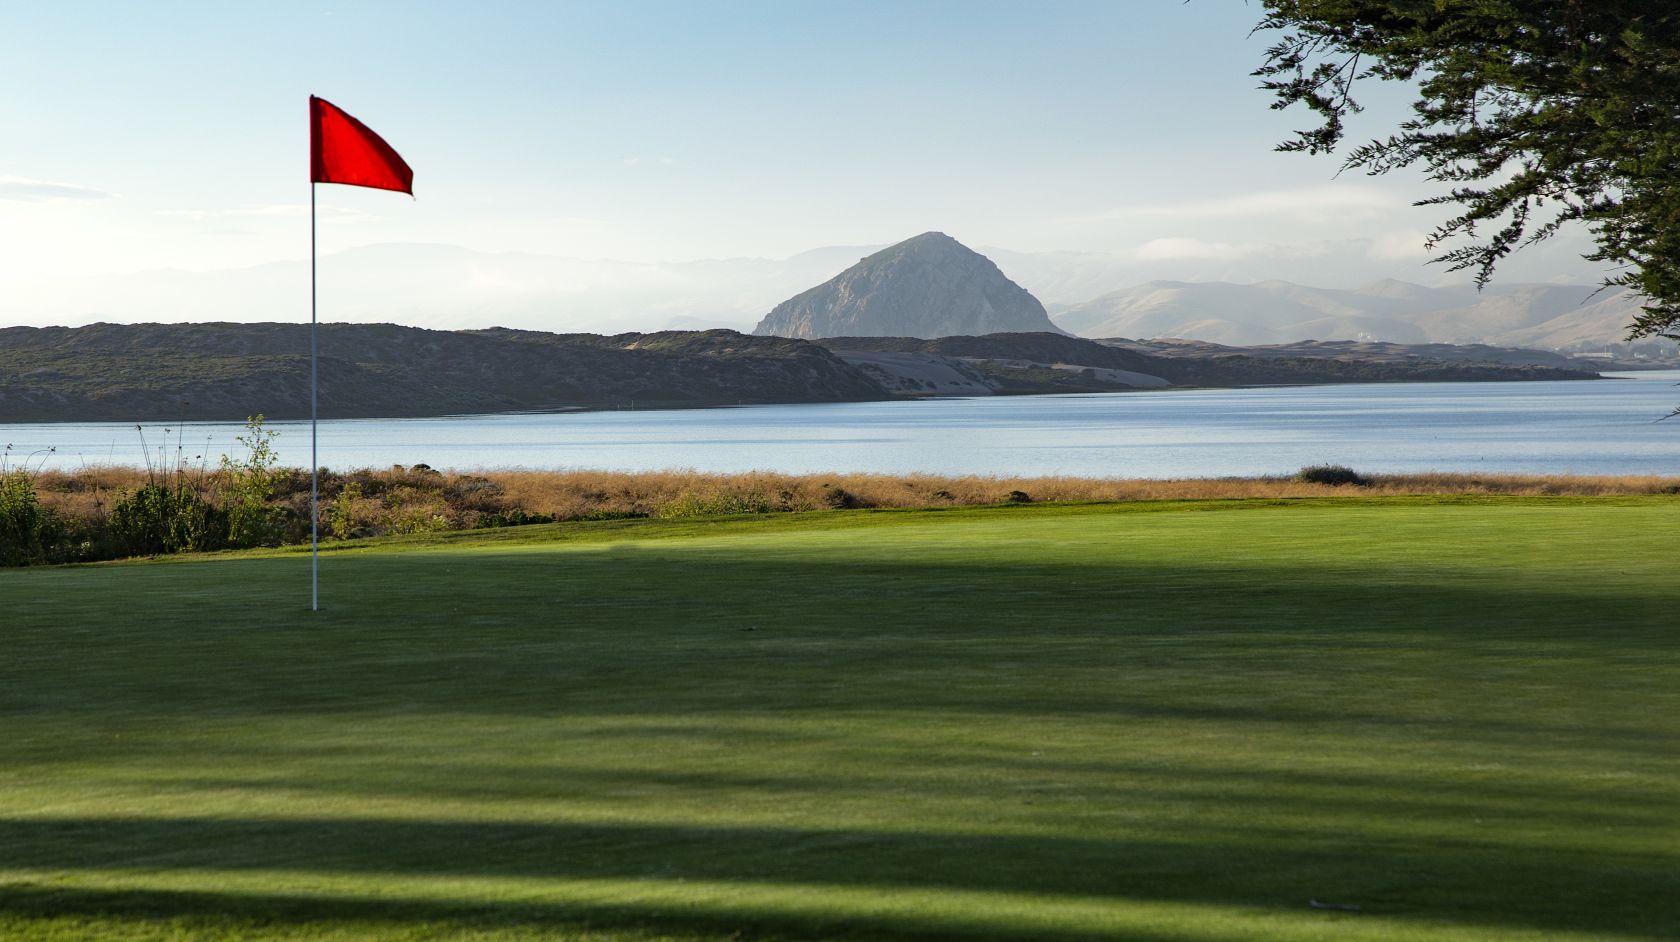 Sea Pines Resort's impeccable golf green overlooking Los Osos back bay and Morro Rock